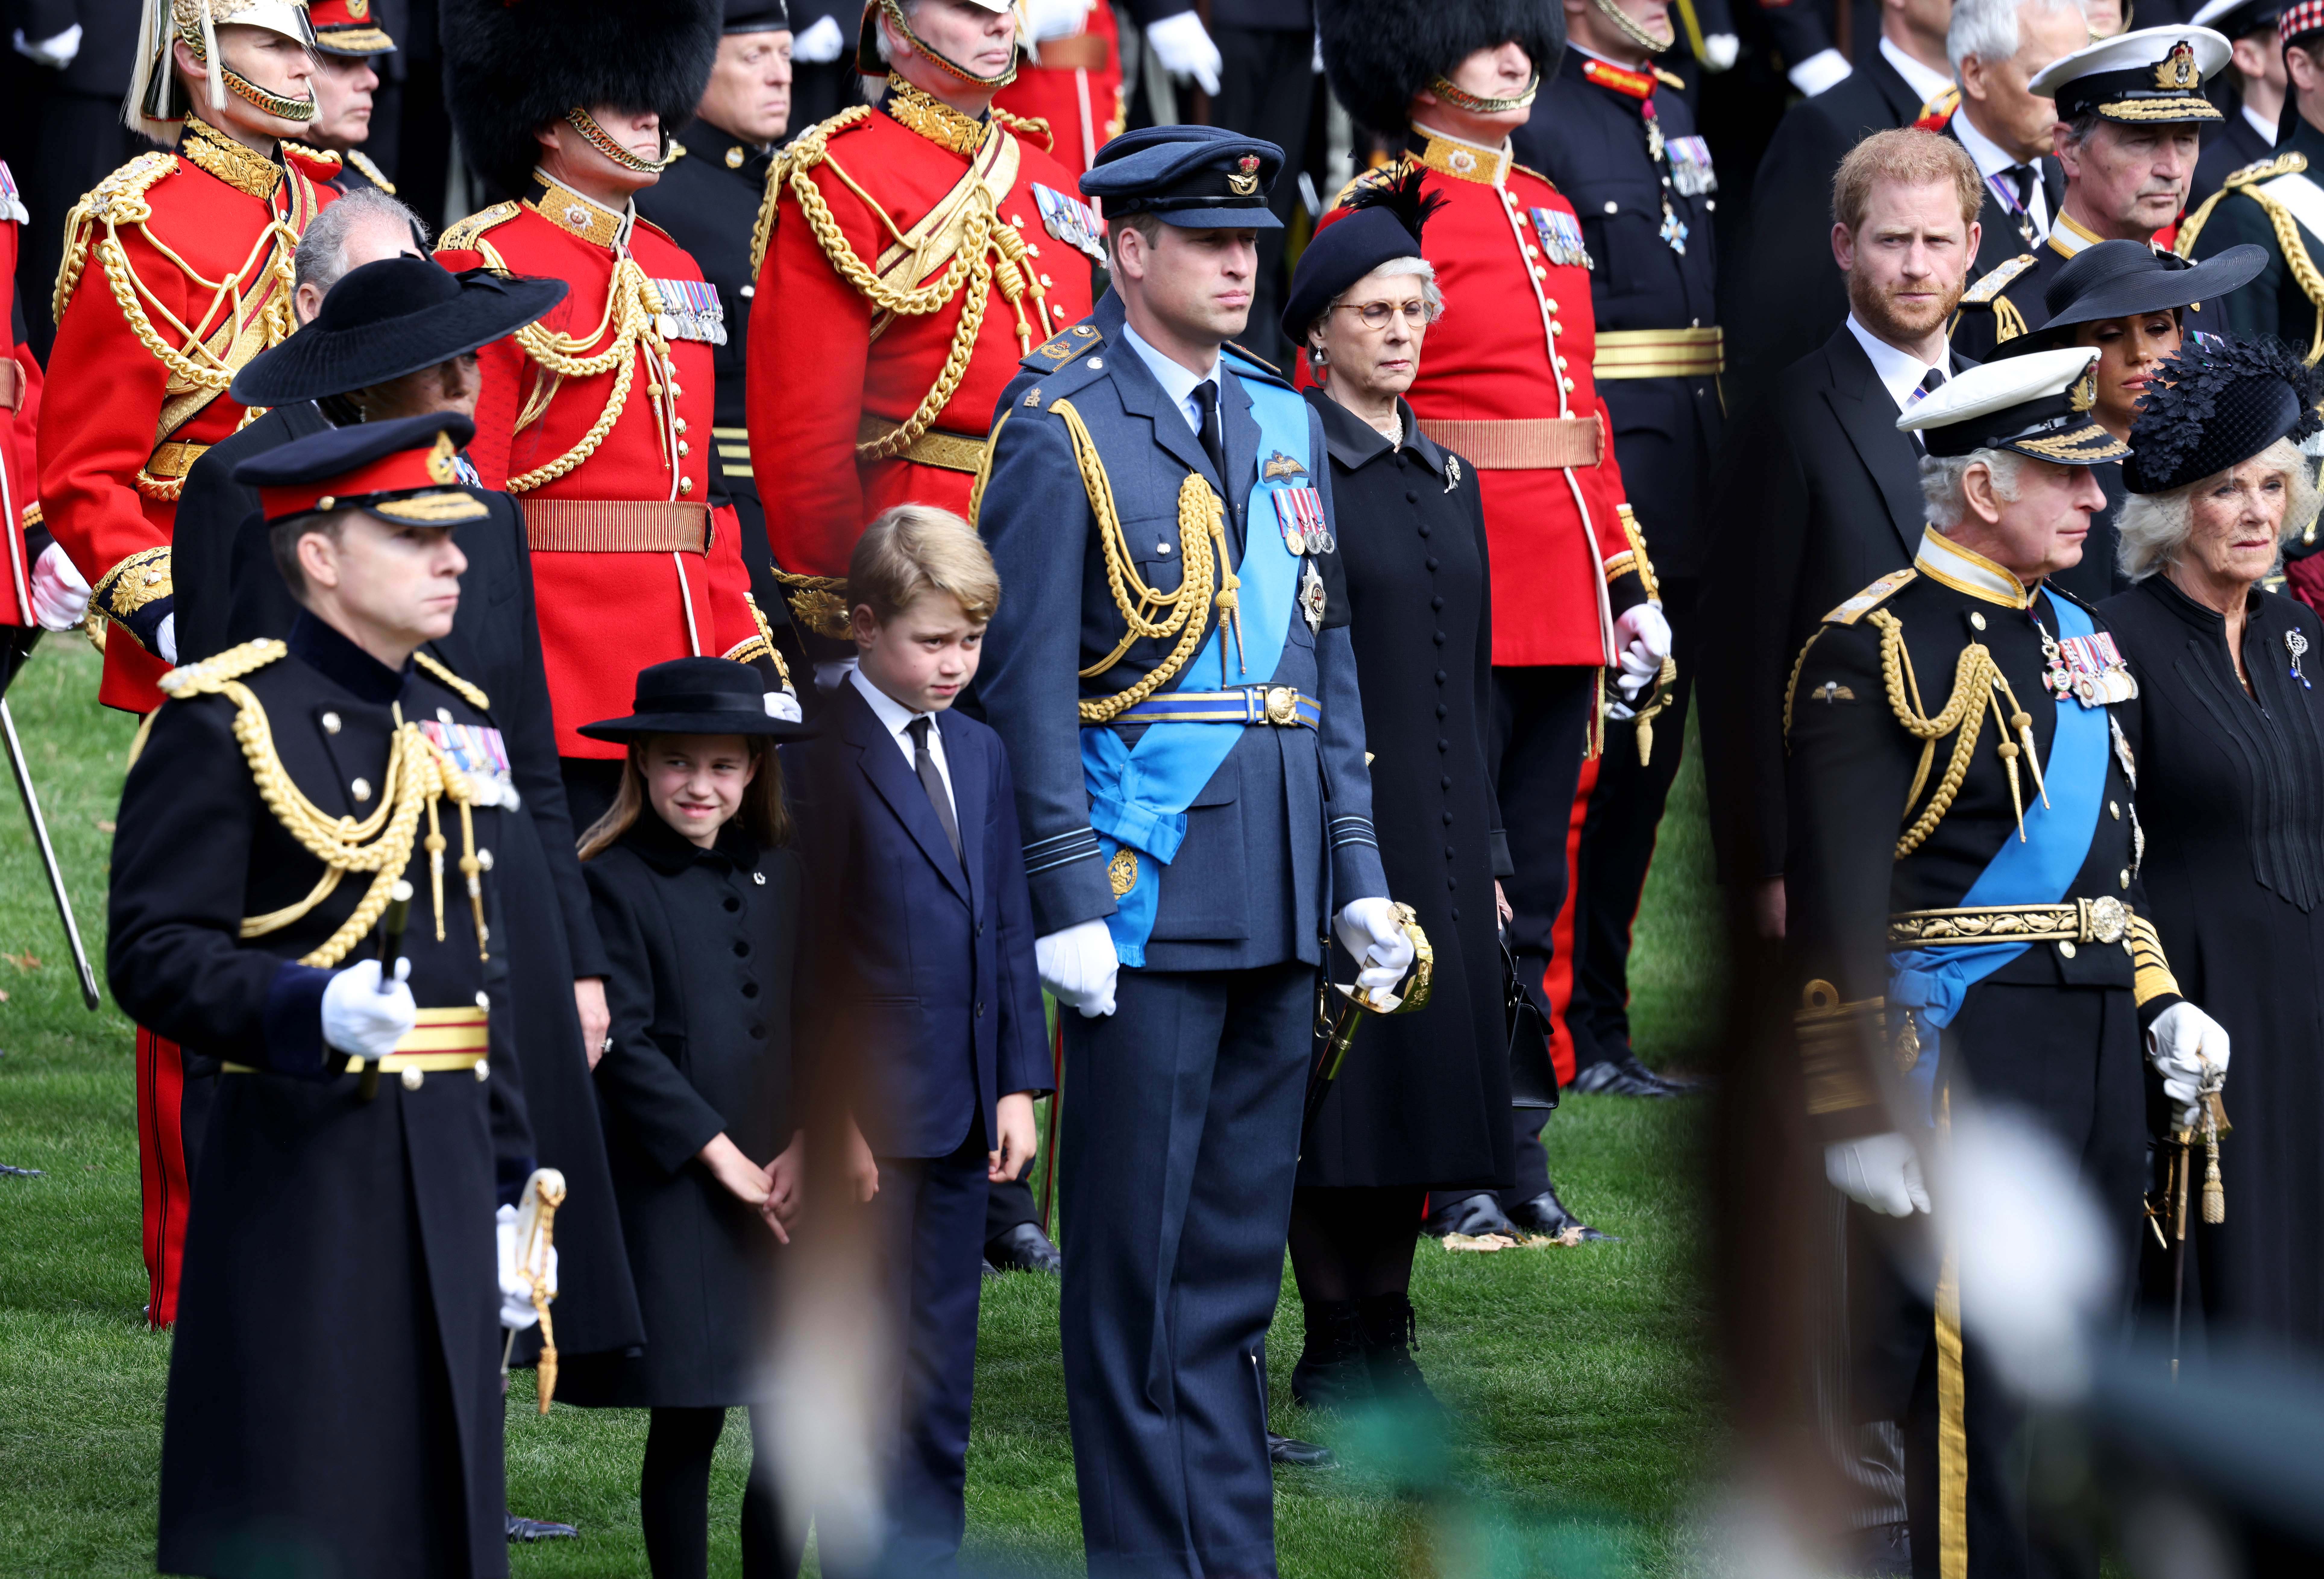 King Charles III, Camilla, Queen Consort, Prince William, Prince of Wales, Prince Harry, Duke of Sussex, Meghan, Duchess of Sussex, Catherine, Princess of Wales, Prince George of Wales, and Princess Charlotte of Wales watch the funeral procession as it passes through Wellington Arch during the state funeral of Queen Elizabeth II on September 19, 2022, in London, England. | Source: Getty Images